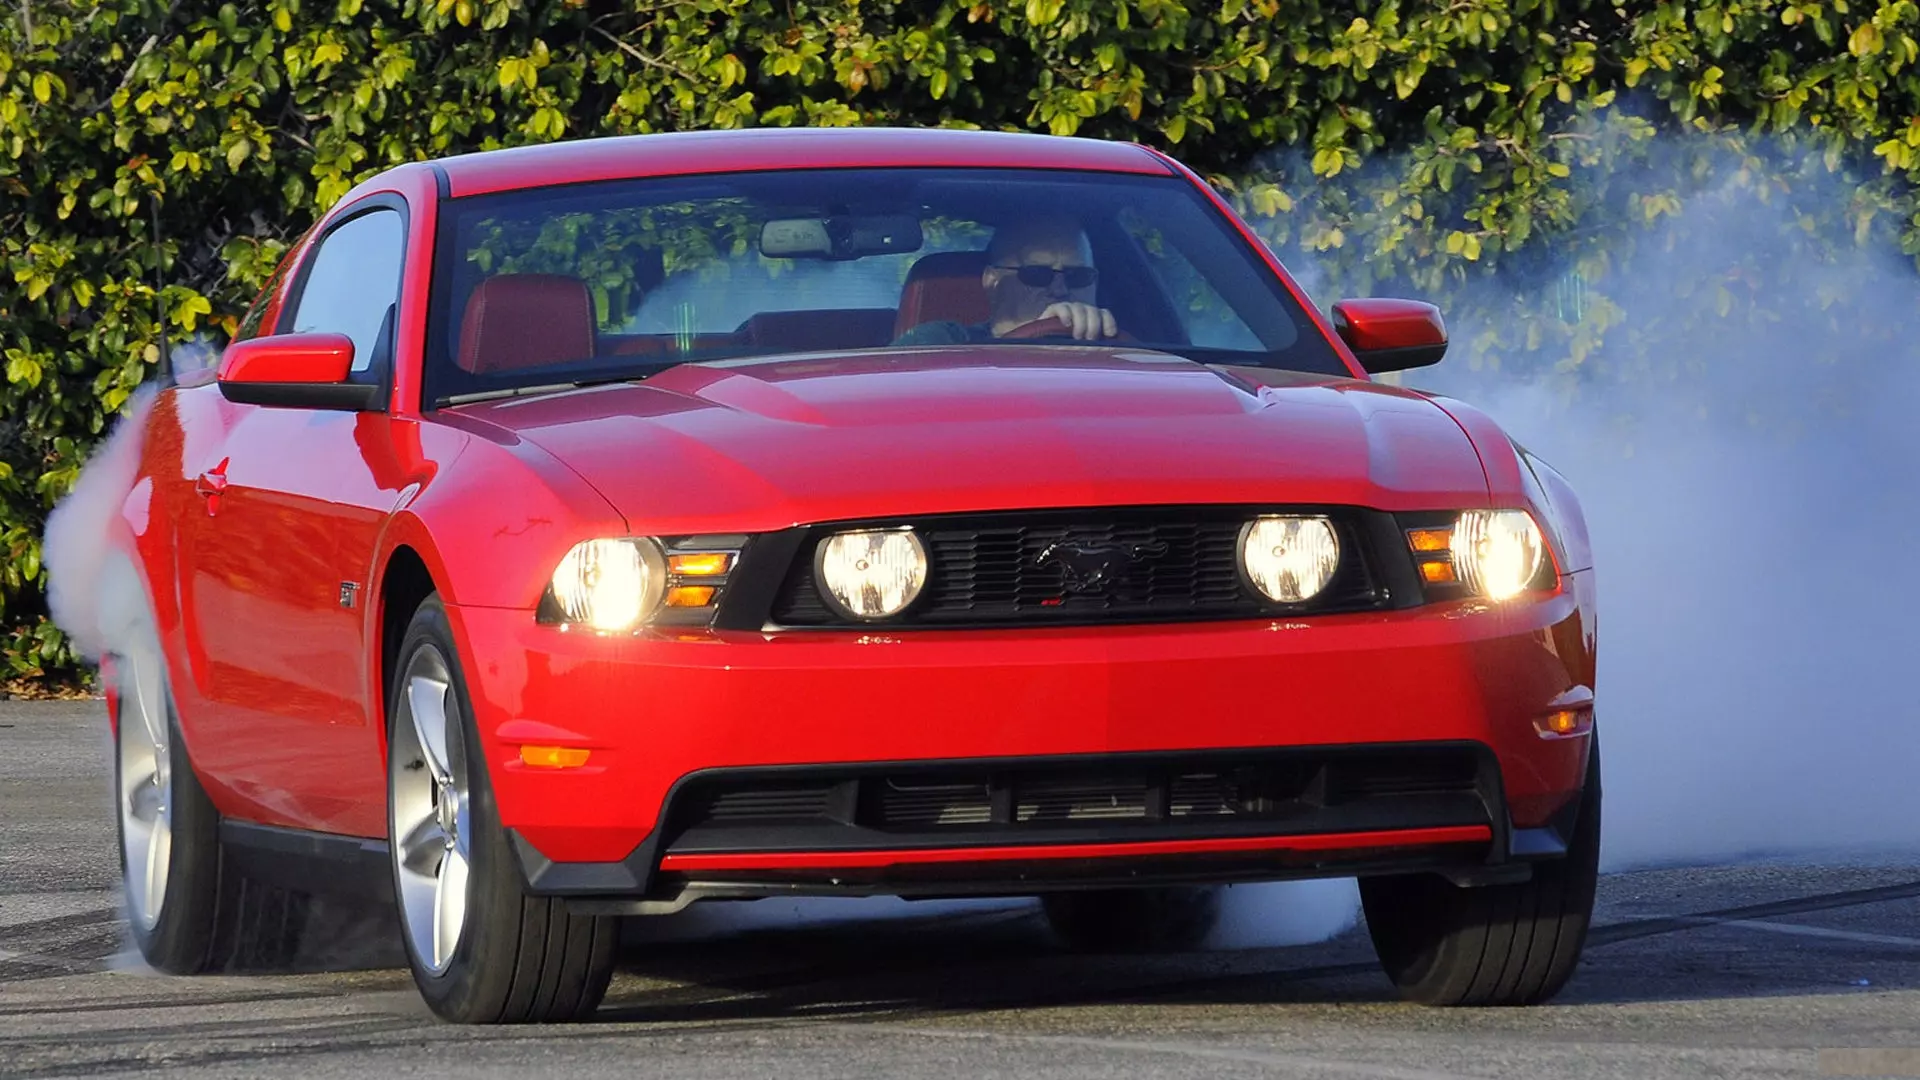 S197 Ford Mustang: Track Day Hero or Jean-Shorts Zero? Insights From A Driving Instructor